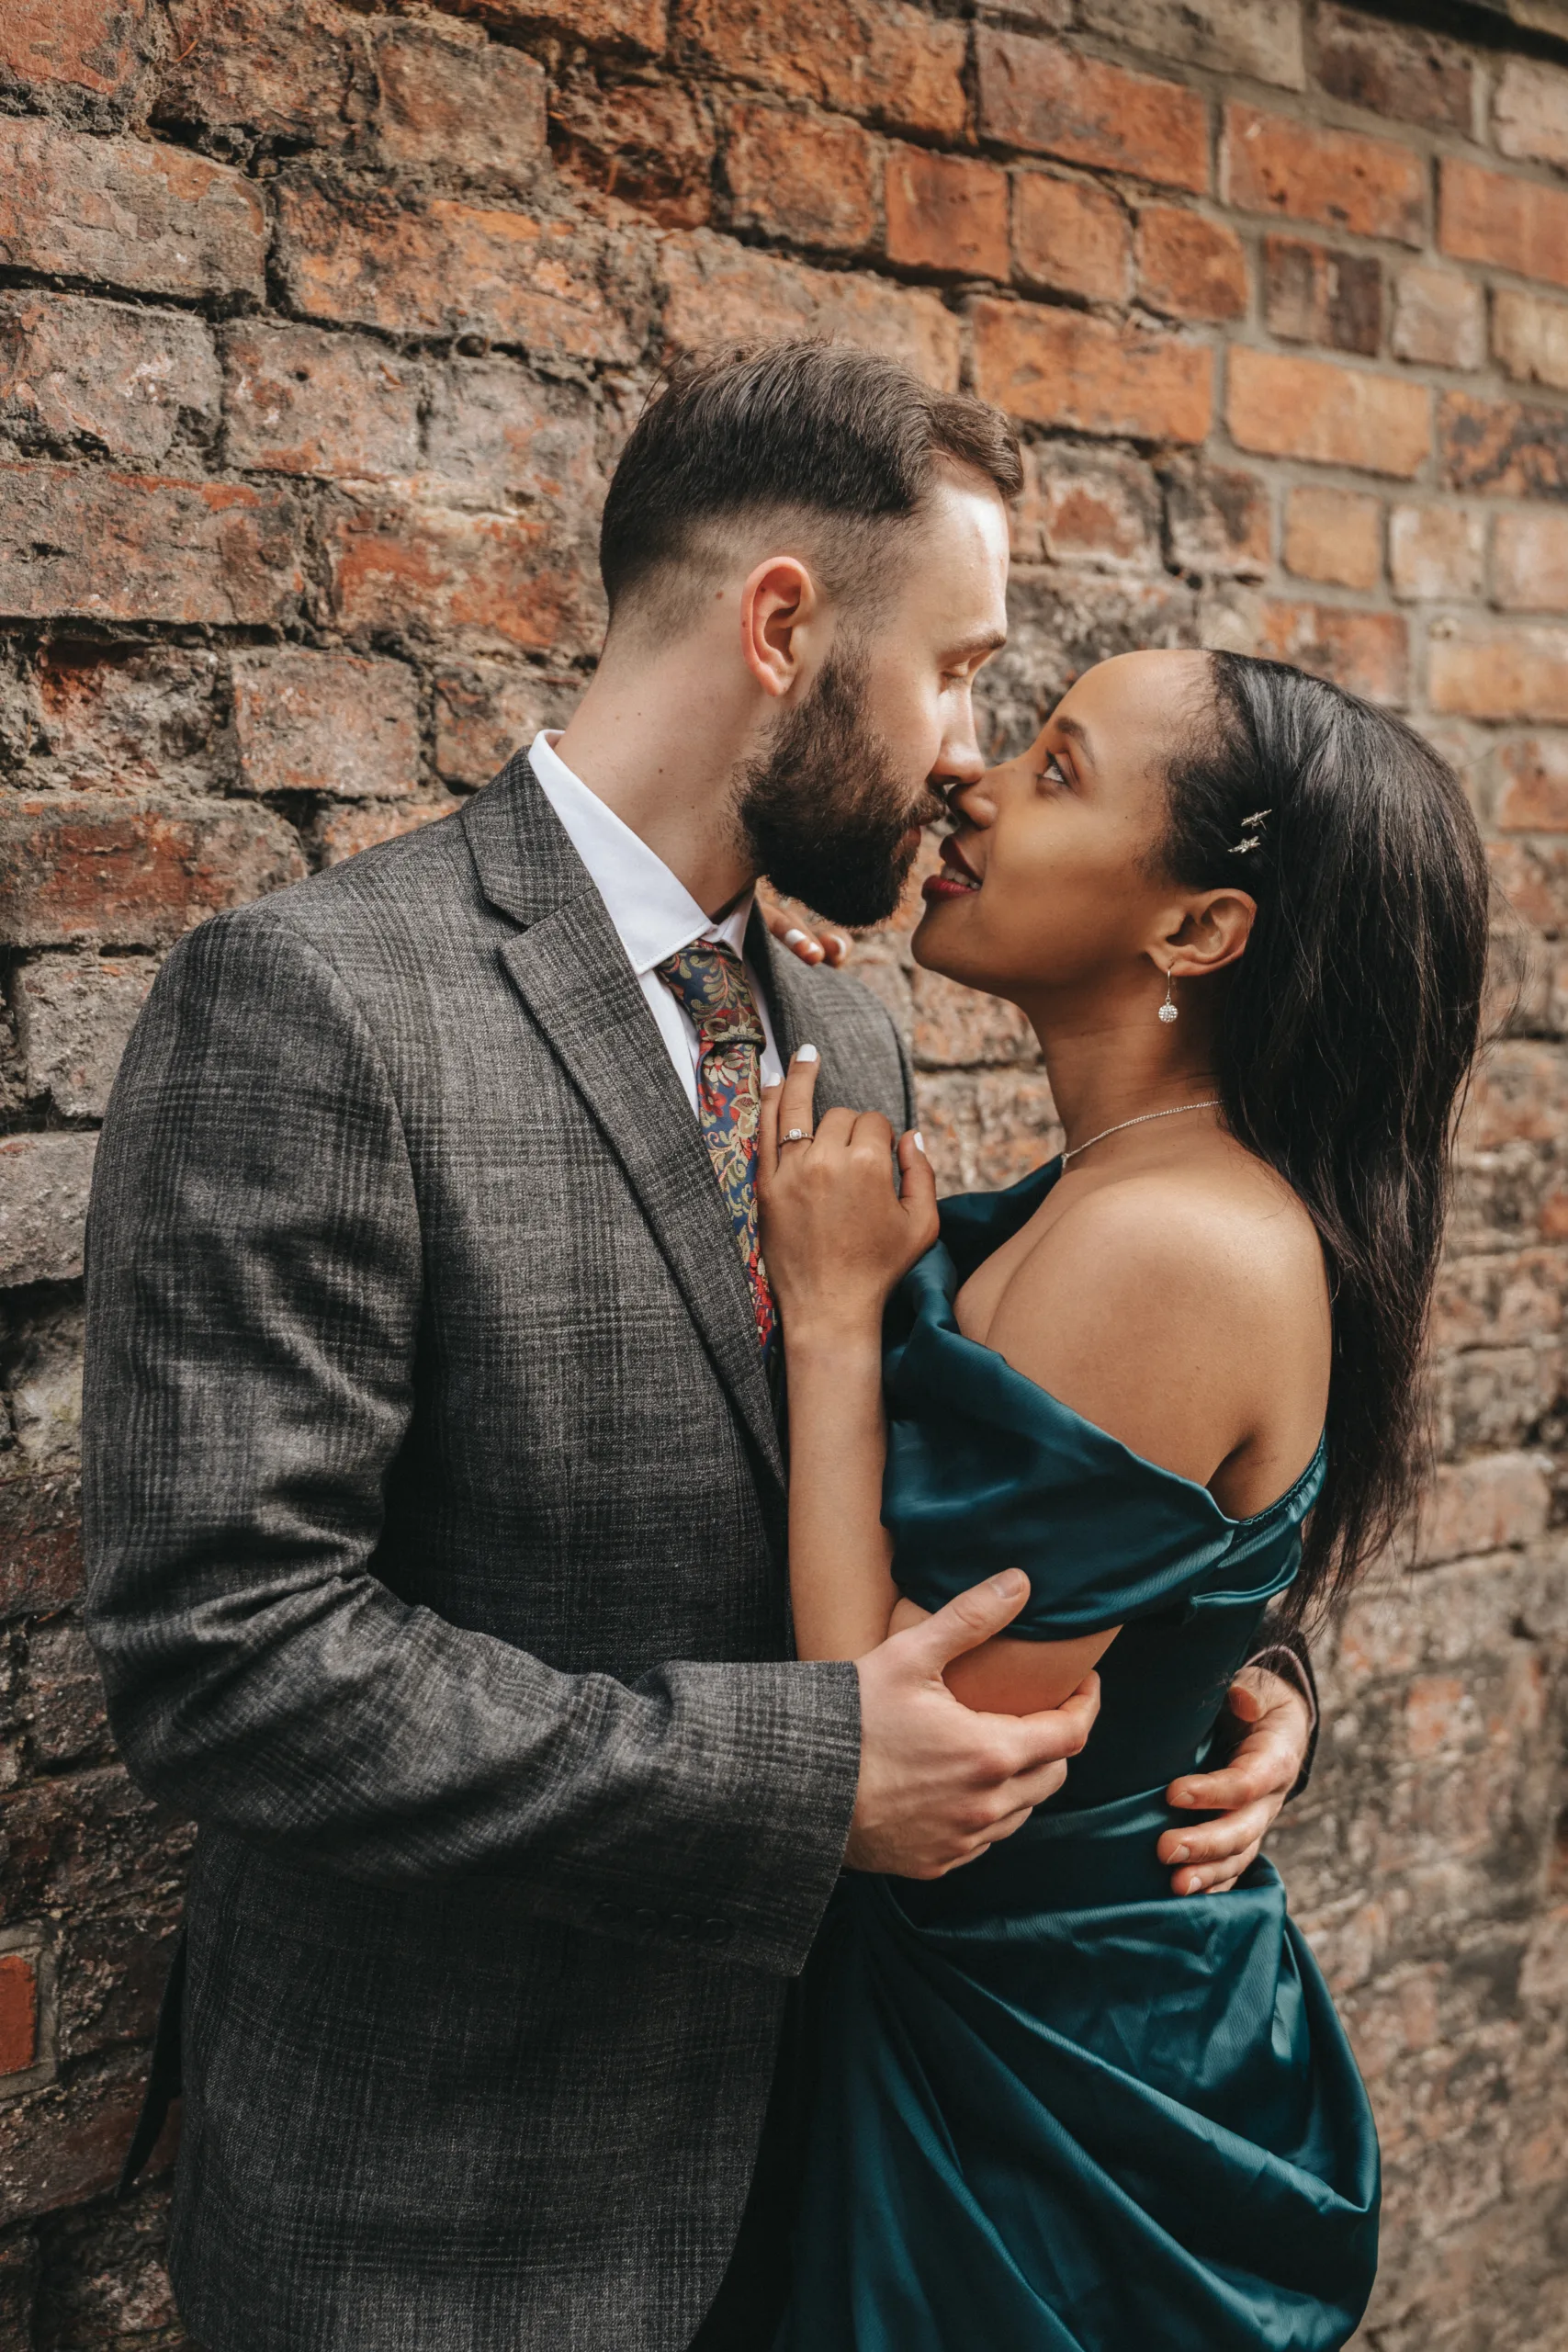 An engaged couple kissing in front of a brick wall captured in Yorkshire.